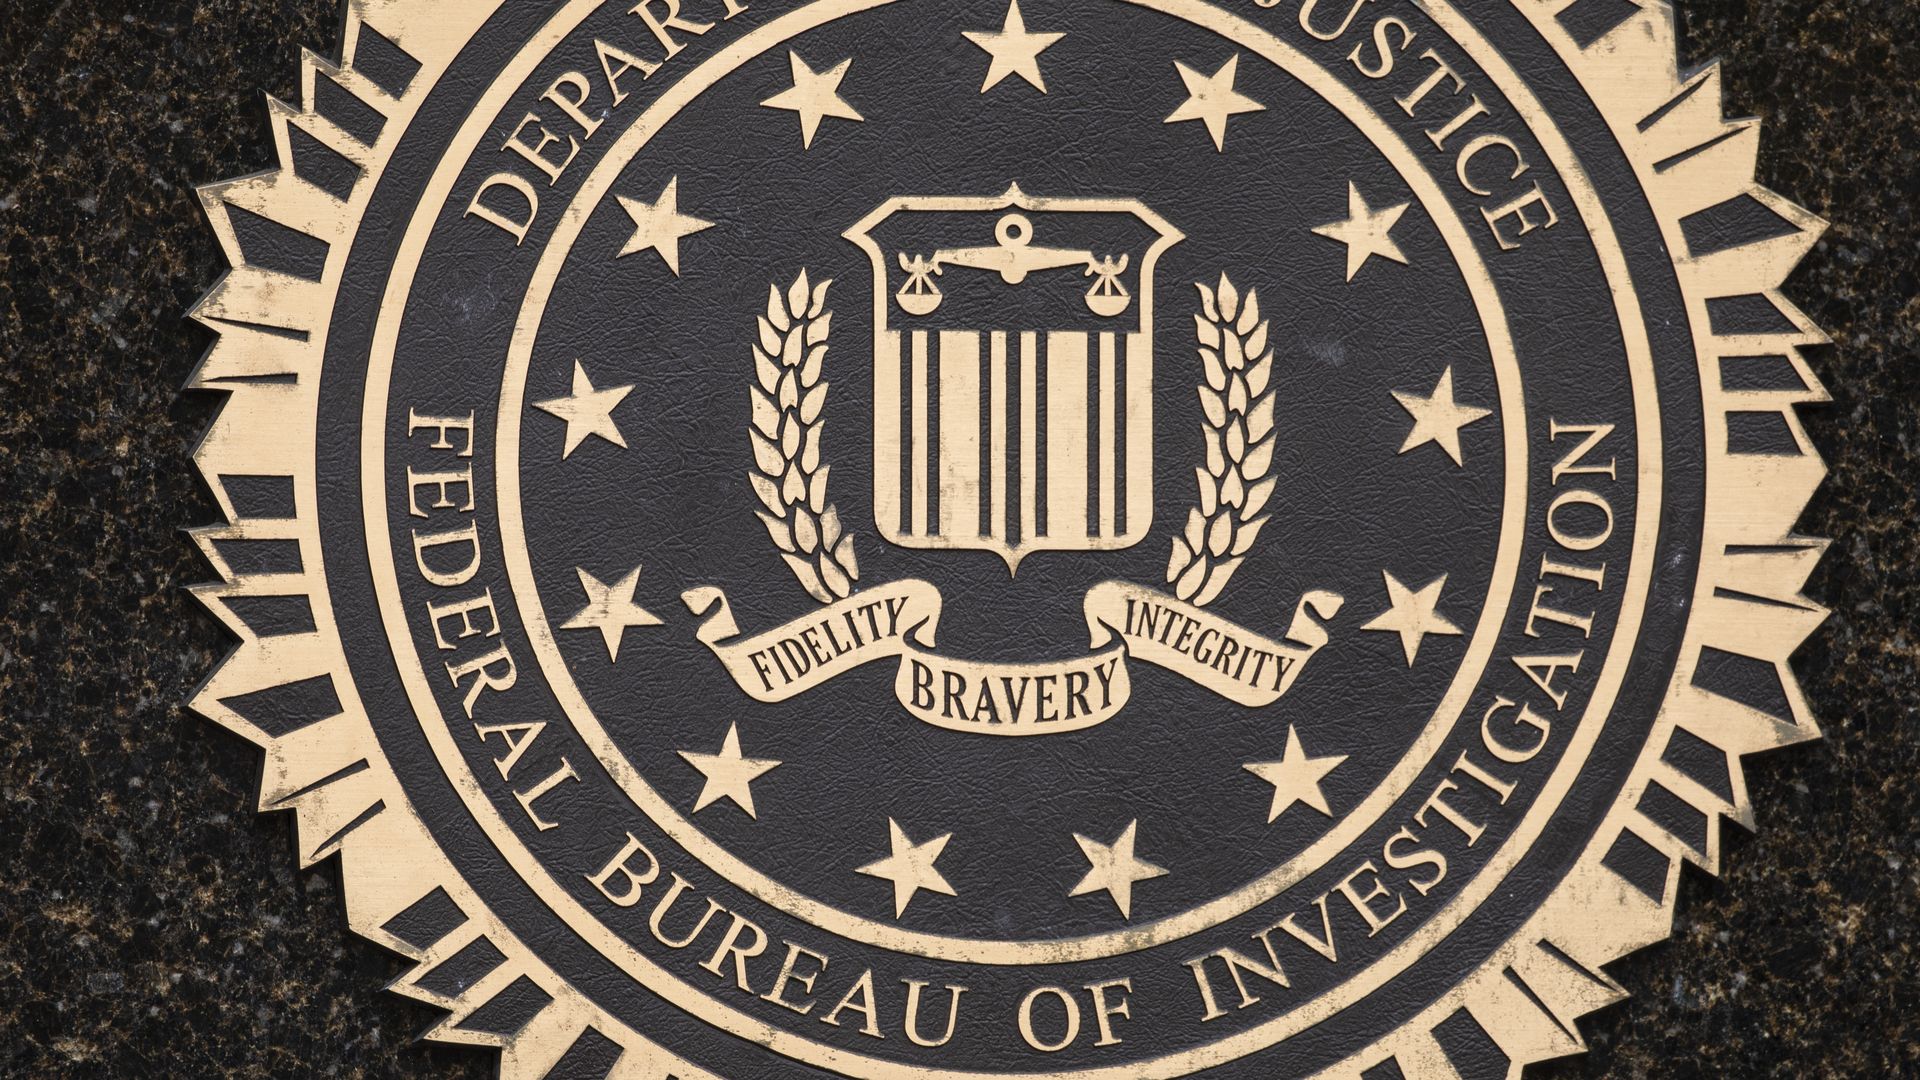 The Federal Bureau of Investigation seal in its headquarters in Washington, D.C.